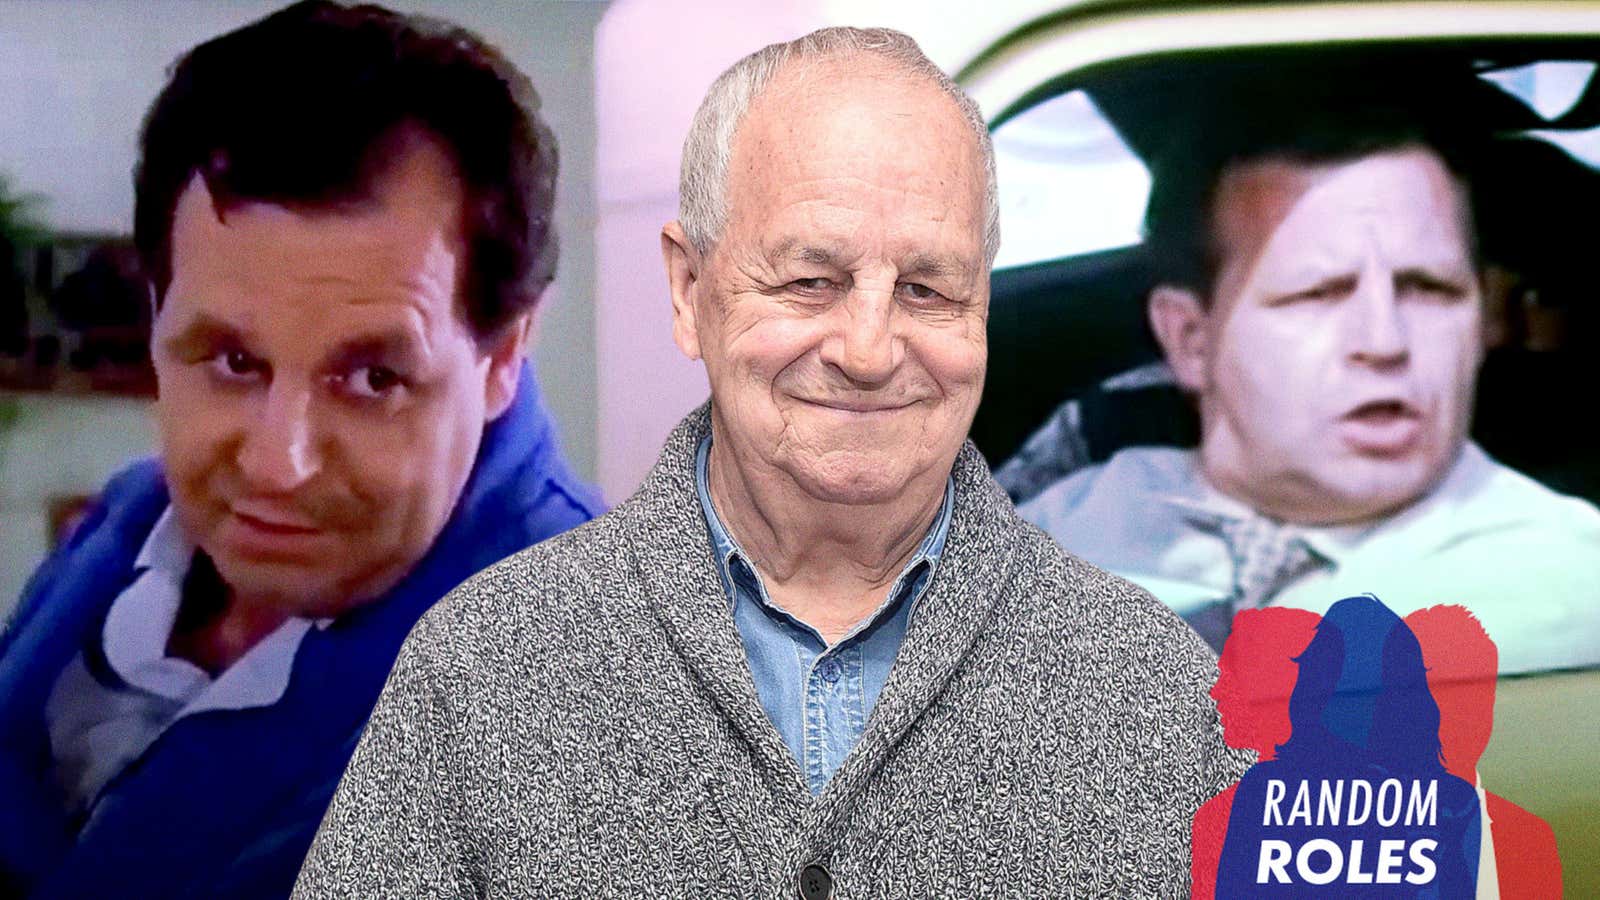 From left: Paul Dooley in Sixteen Candles (Screenshot), at the premiere of Other People in 2016 (Photo: Mike Windle/Getty Images), and in Breaking Away (Screenshot)